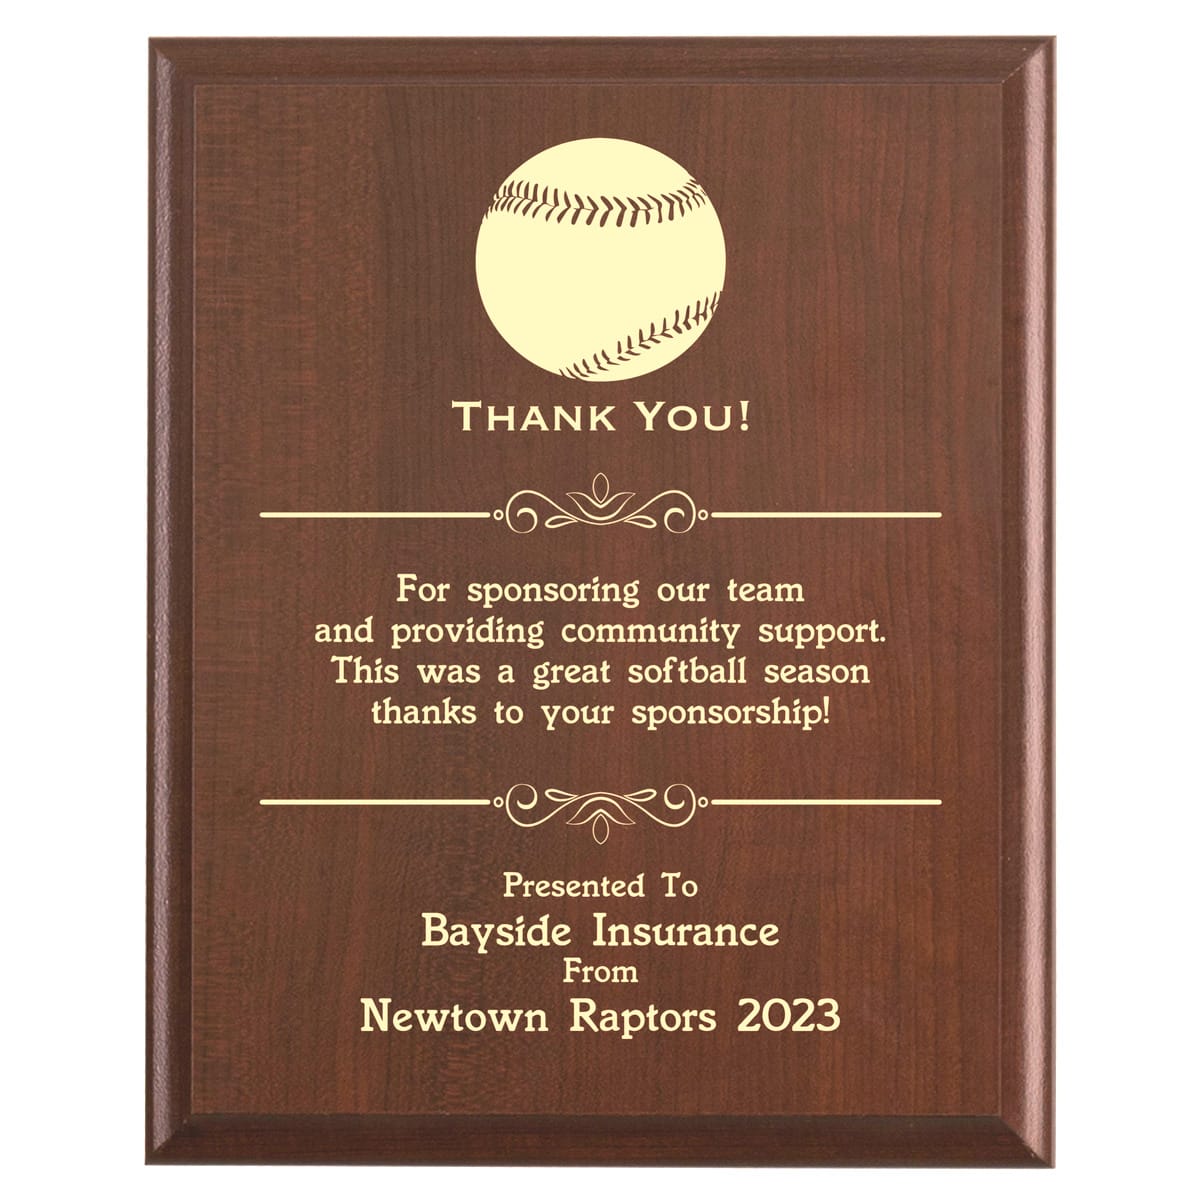 Plaque photo: Softball Sponsor Thank You Gift design with free personalization. Wood style finish with customized text.